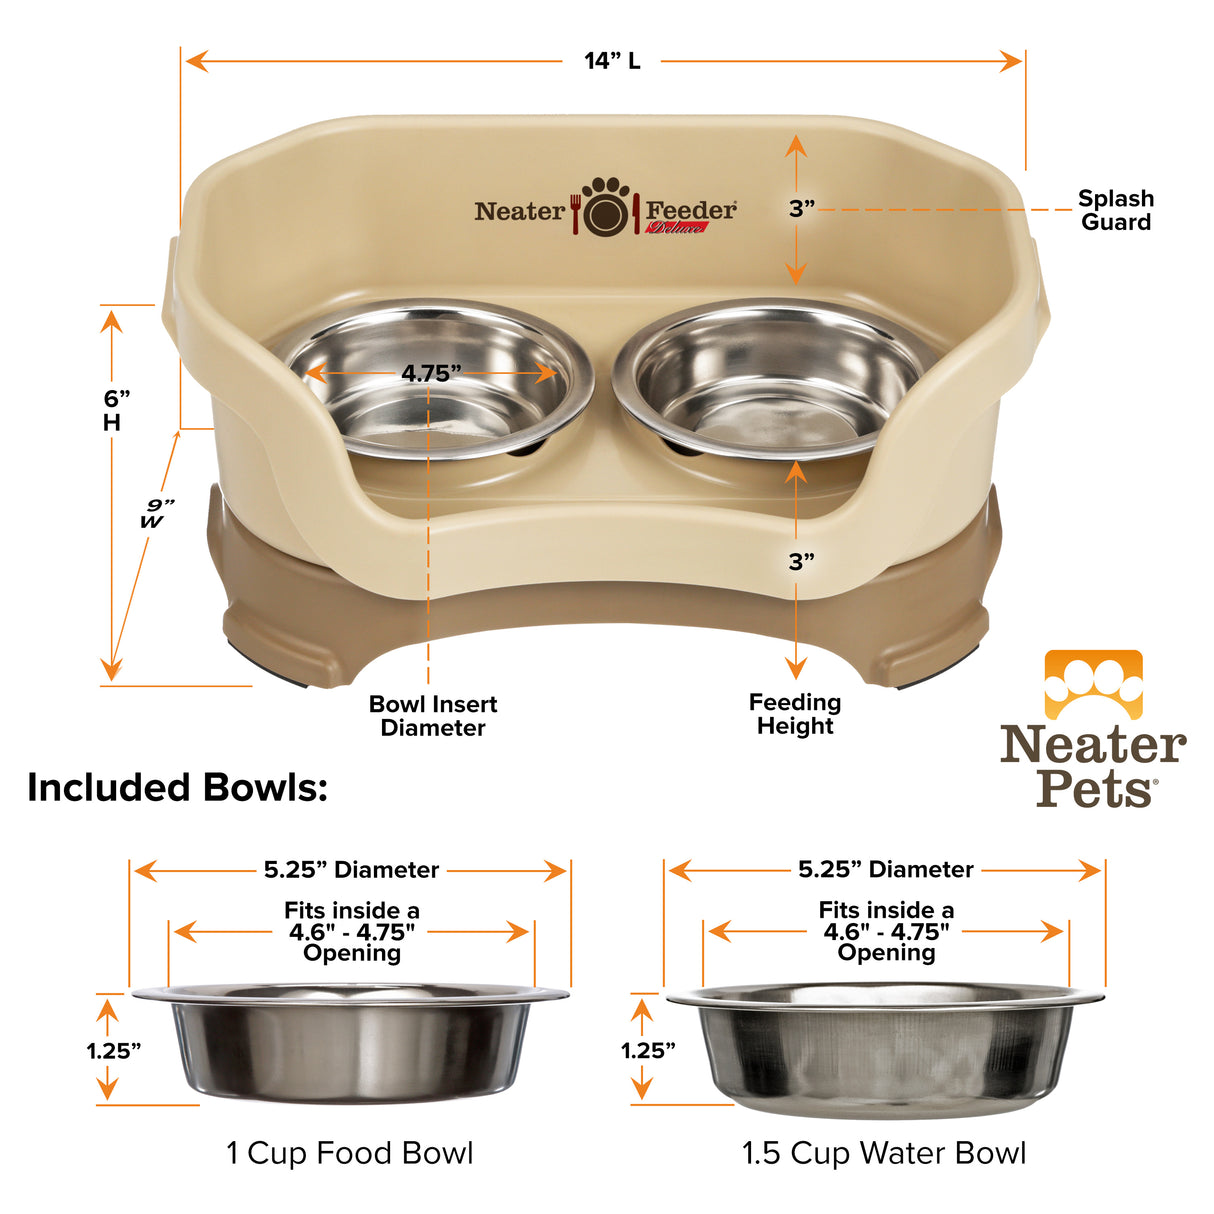 Deluxe Cappuccino Cat Neater Feeder and Bowl dimensions